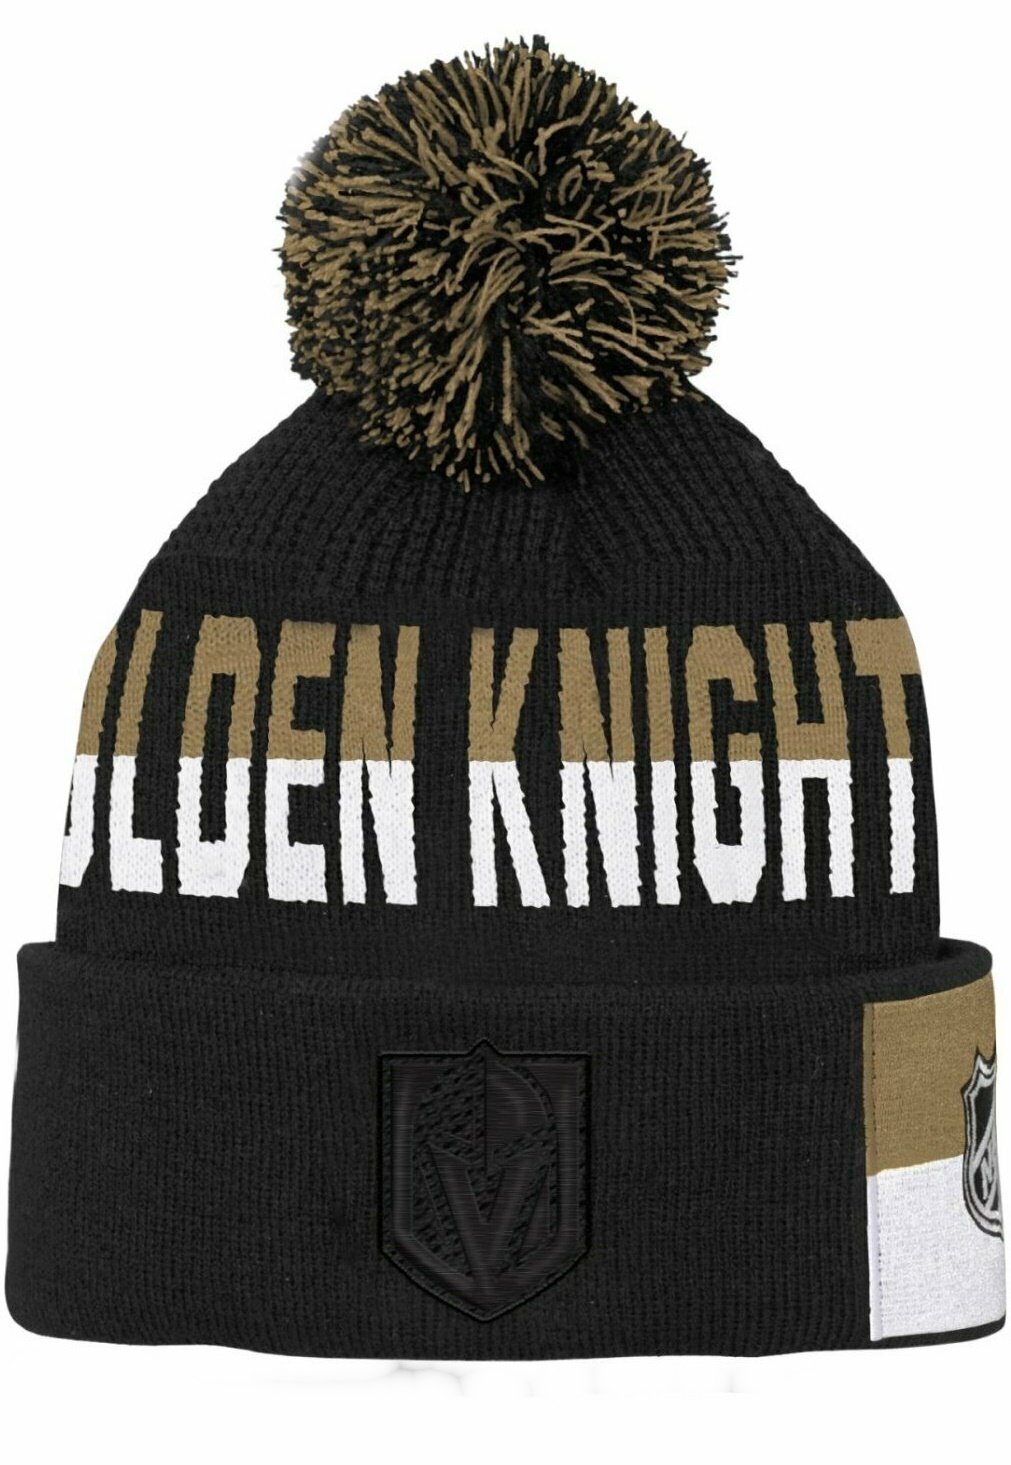 Шапка NHL FACEOFF JACQUARD VEGAS GOLDEN KNIGHTS Outerstuff, цвет black olive